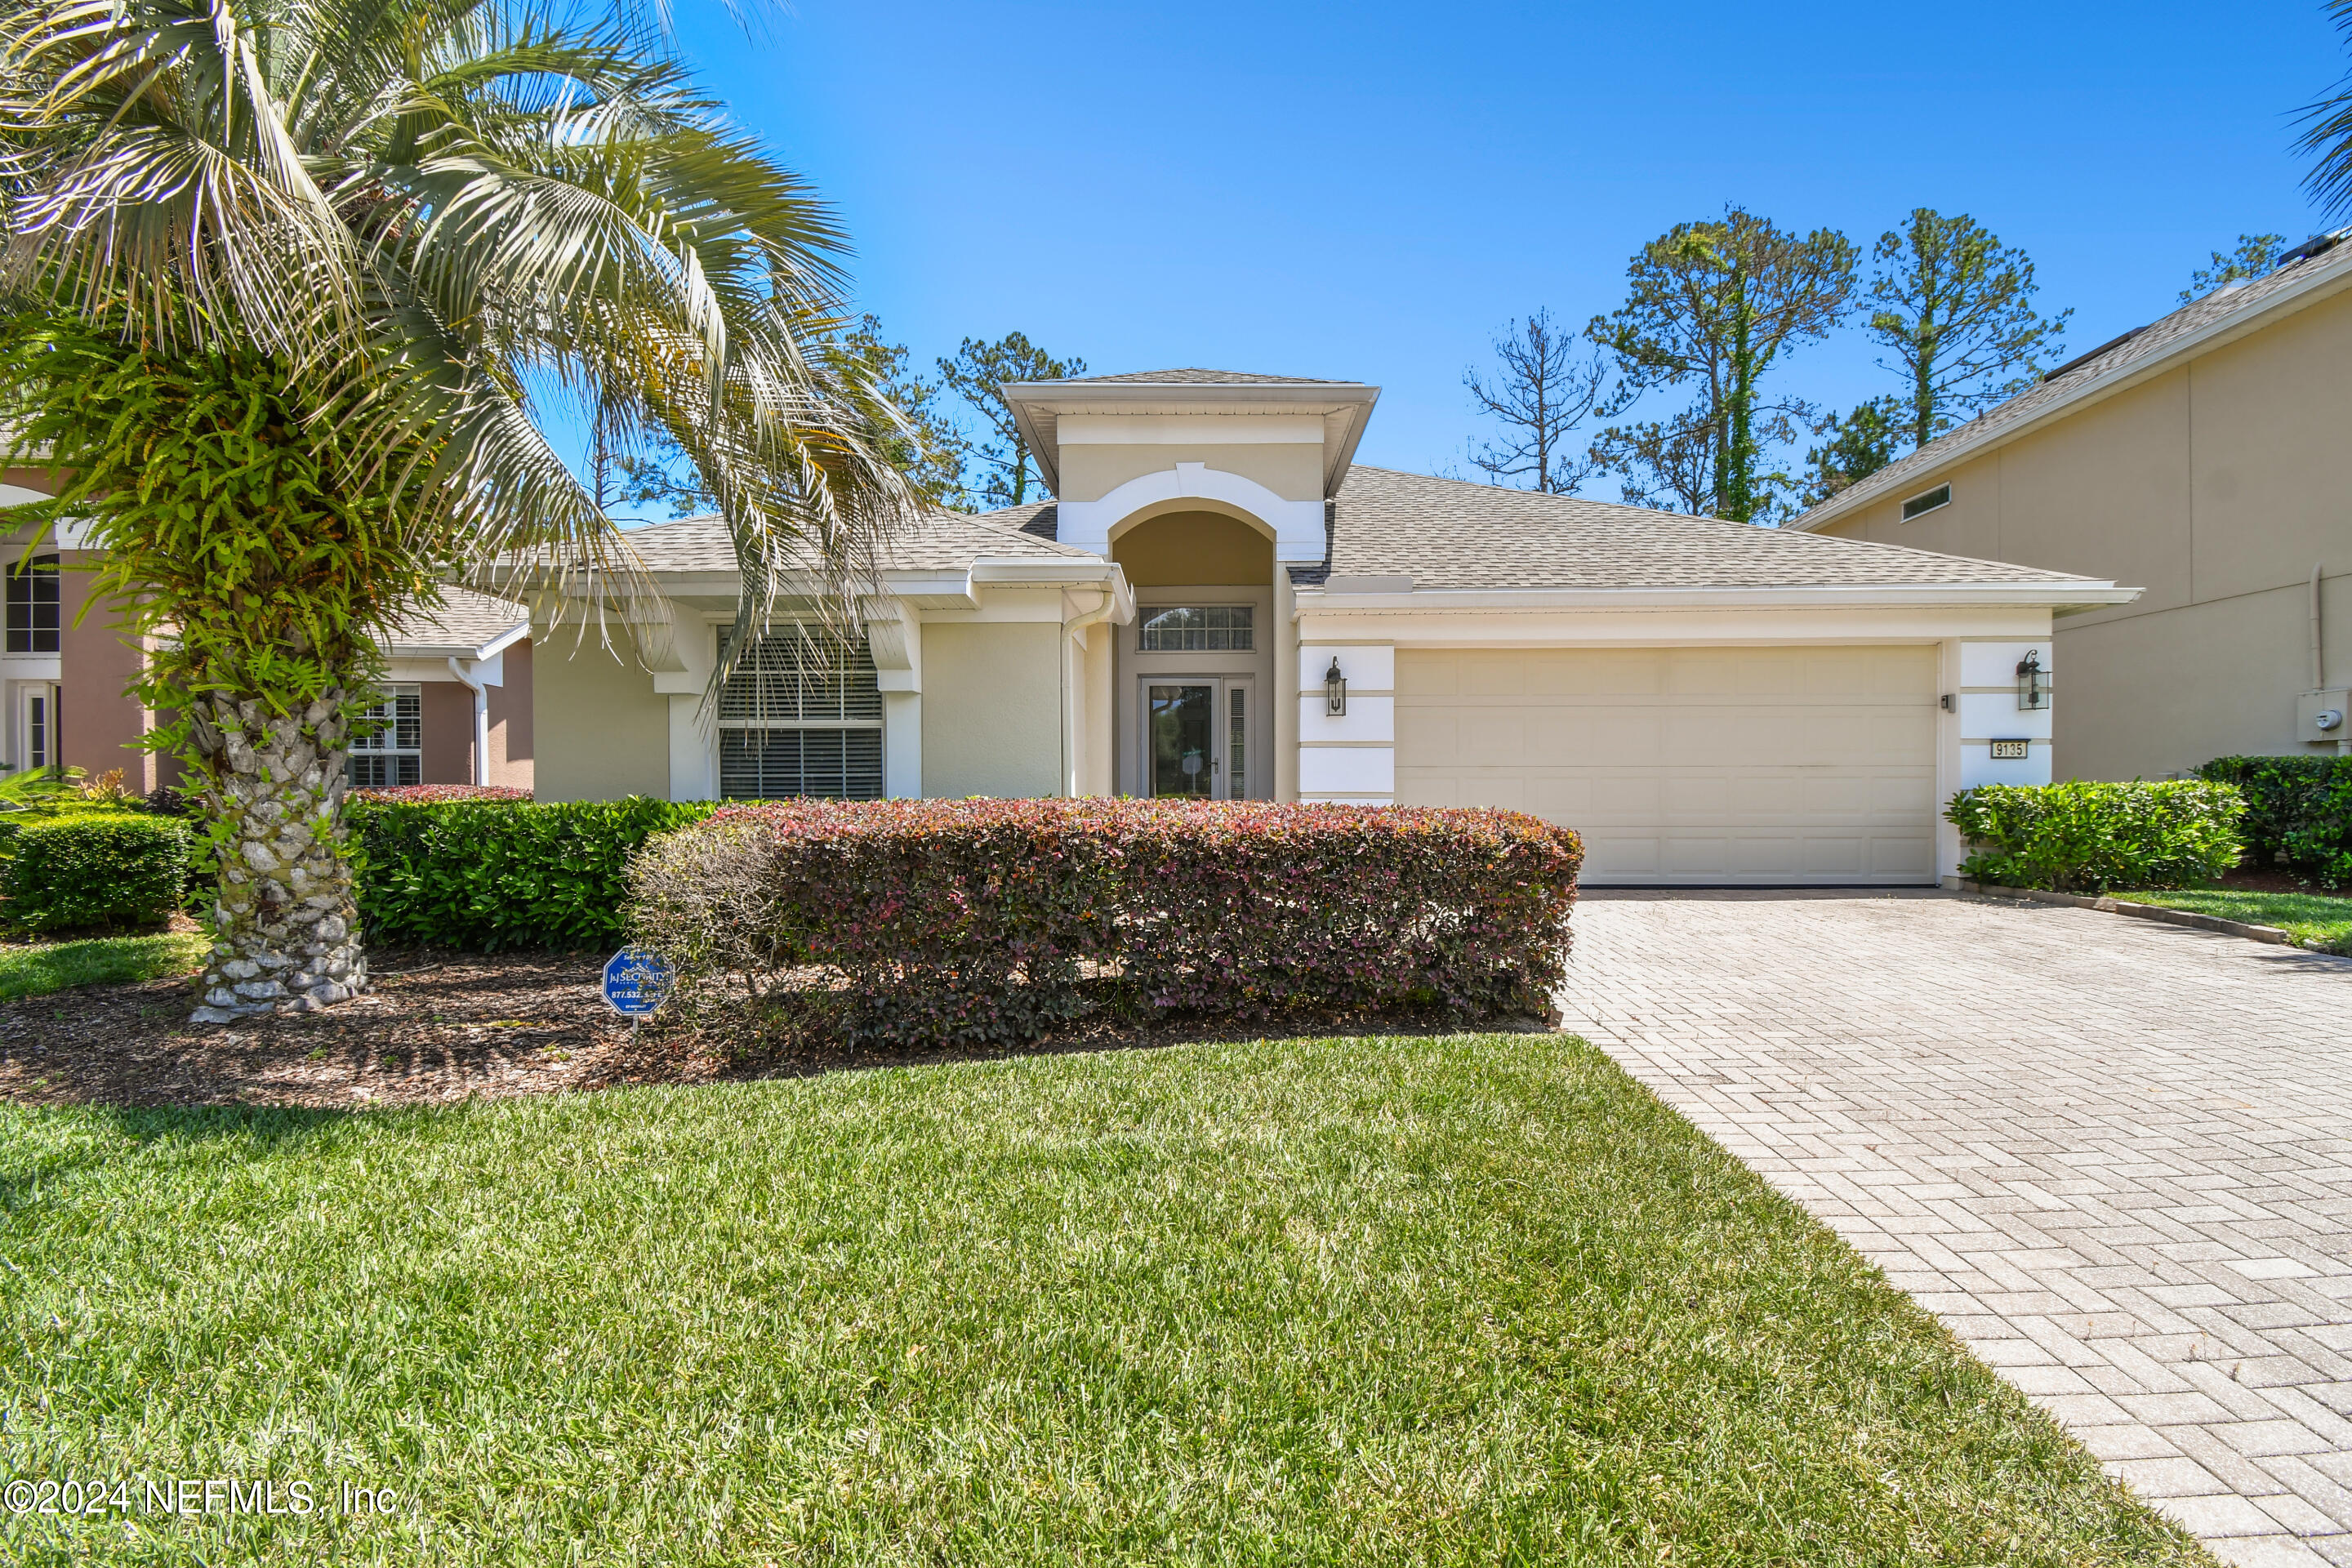 Jacksonville, FL home for sale located at 9135 Sugar Meadow Trail, Jacksonville, FL 32256